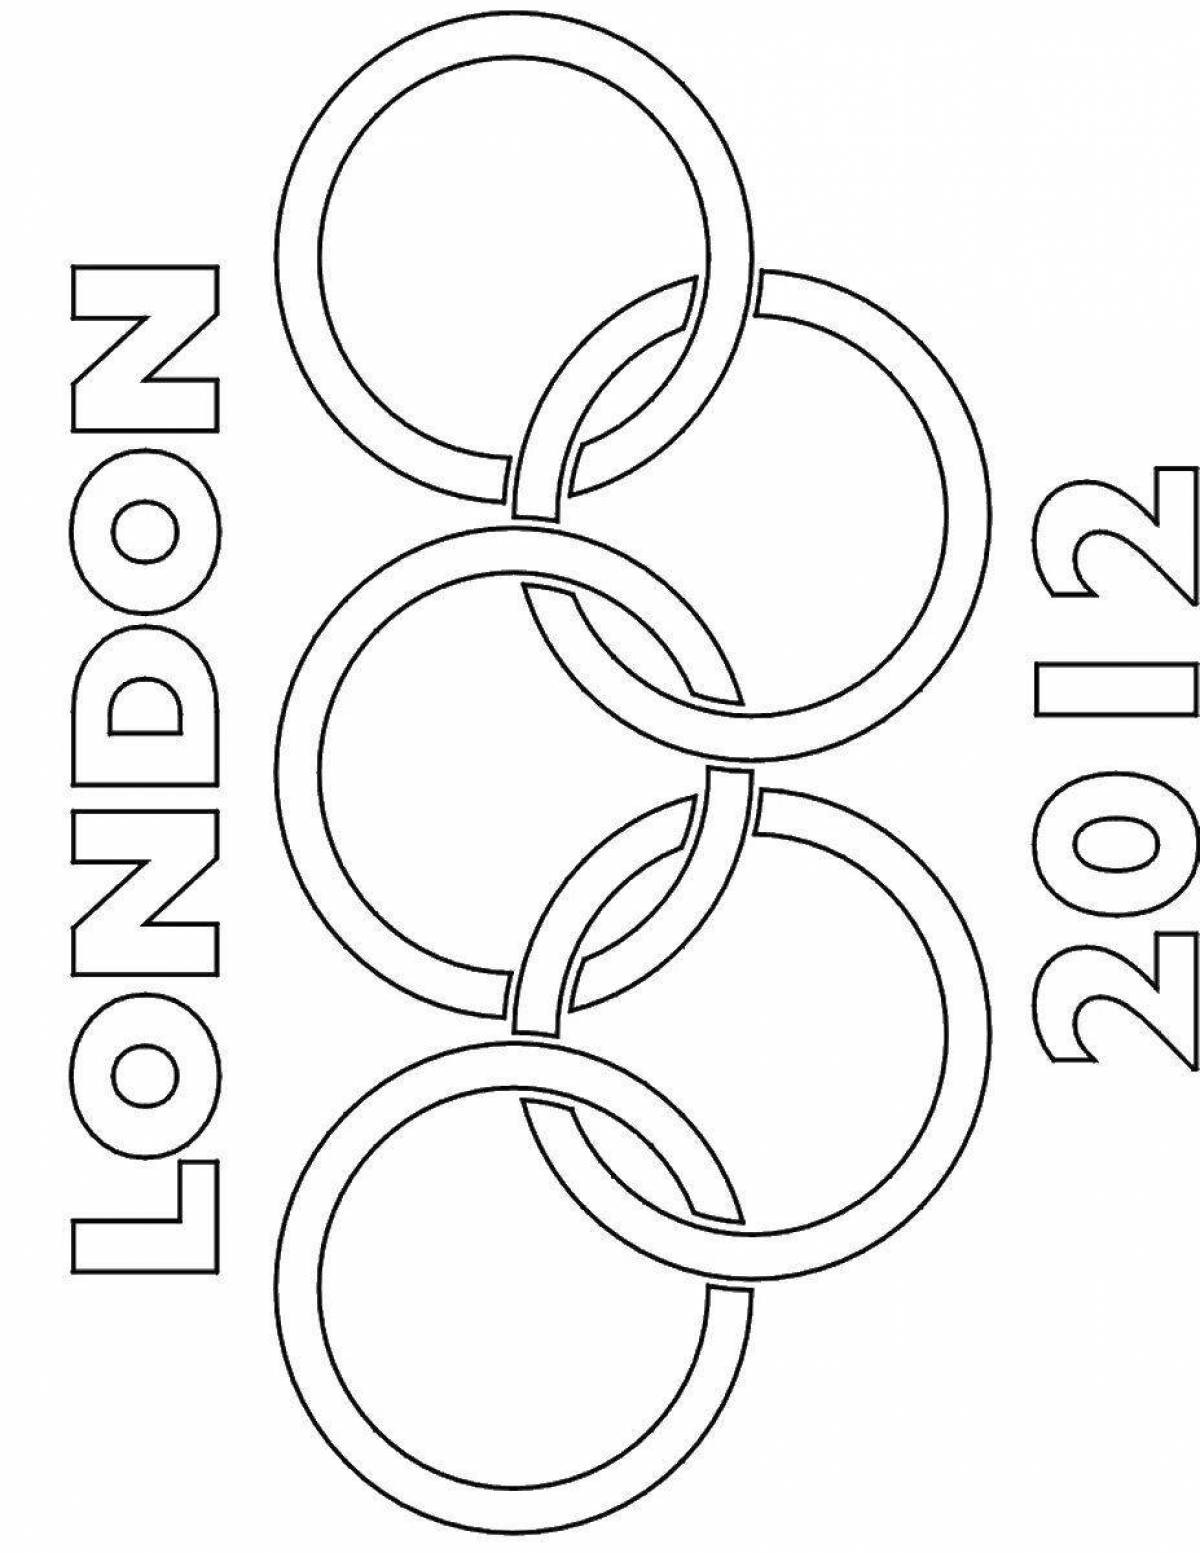 Printable funny olympic rings coloring page